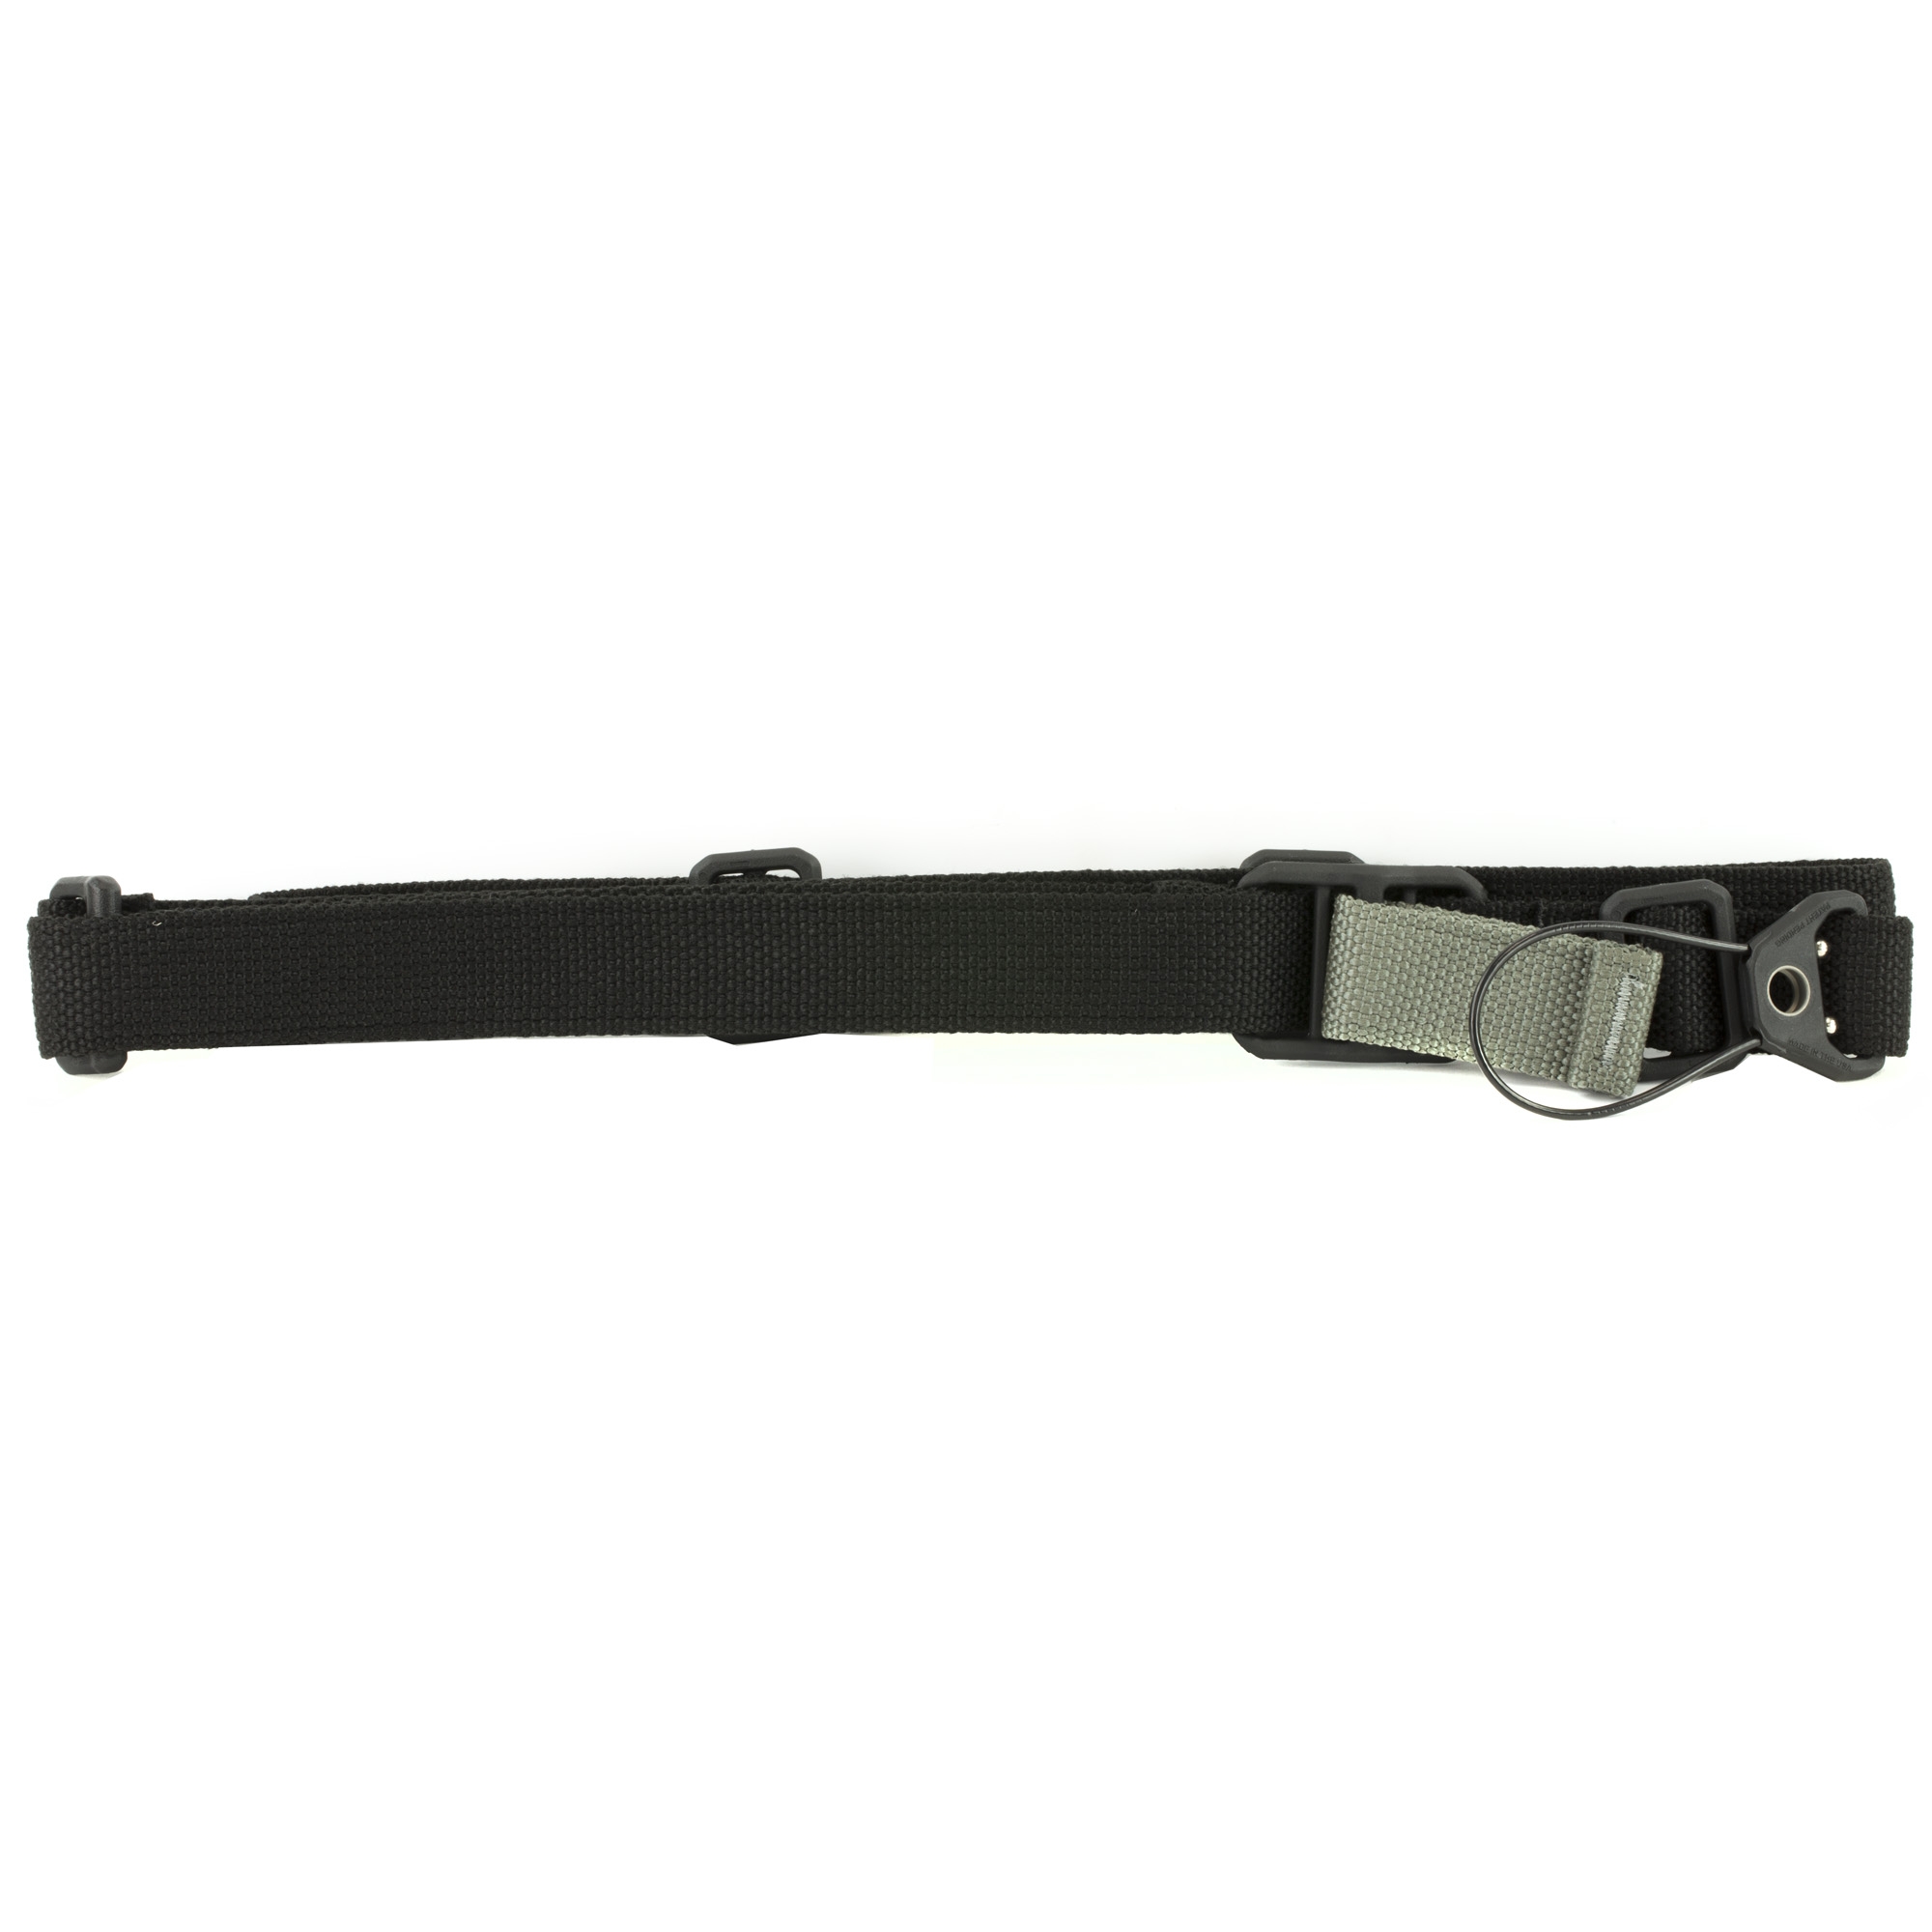 3 POINT WEAPON SLING – Bulldog Tactical Equipment